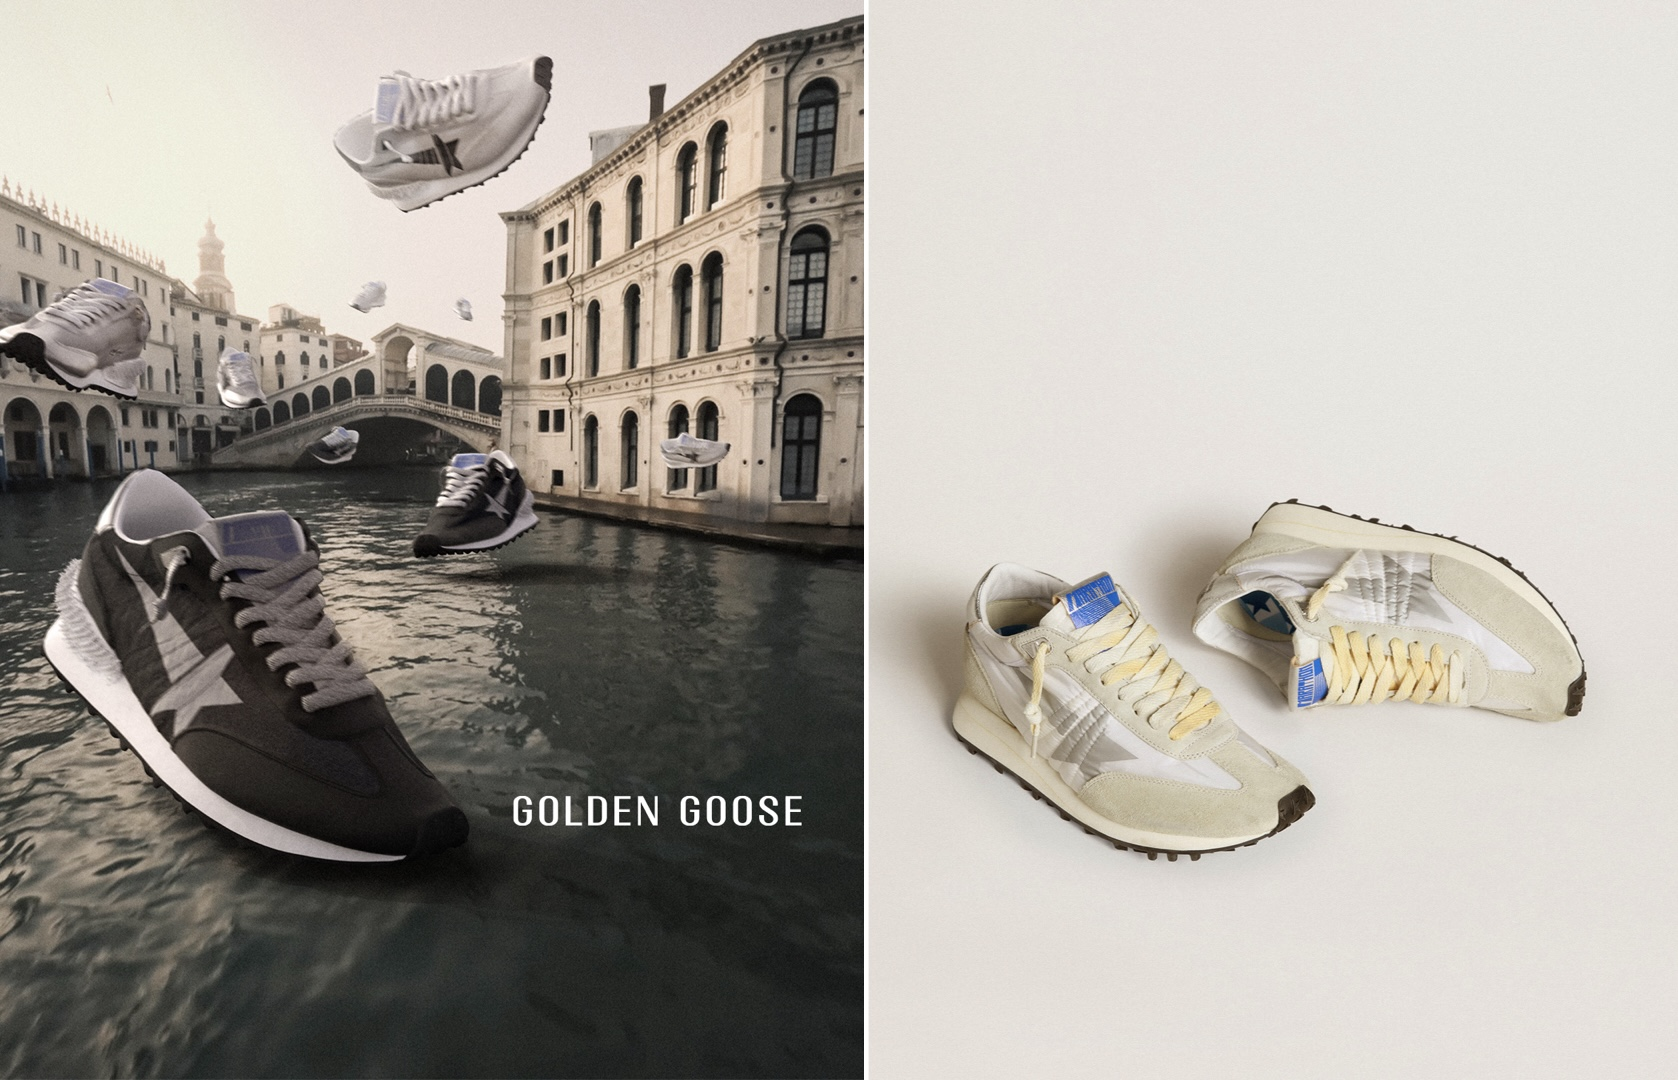 Golden Goose launches an innovative CGI campaign, introducing the latest Marathon sneaker model